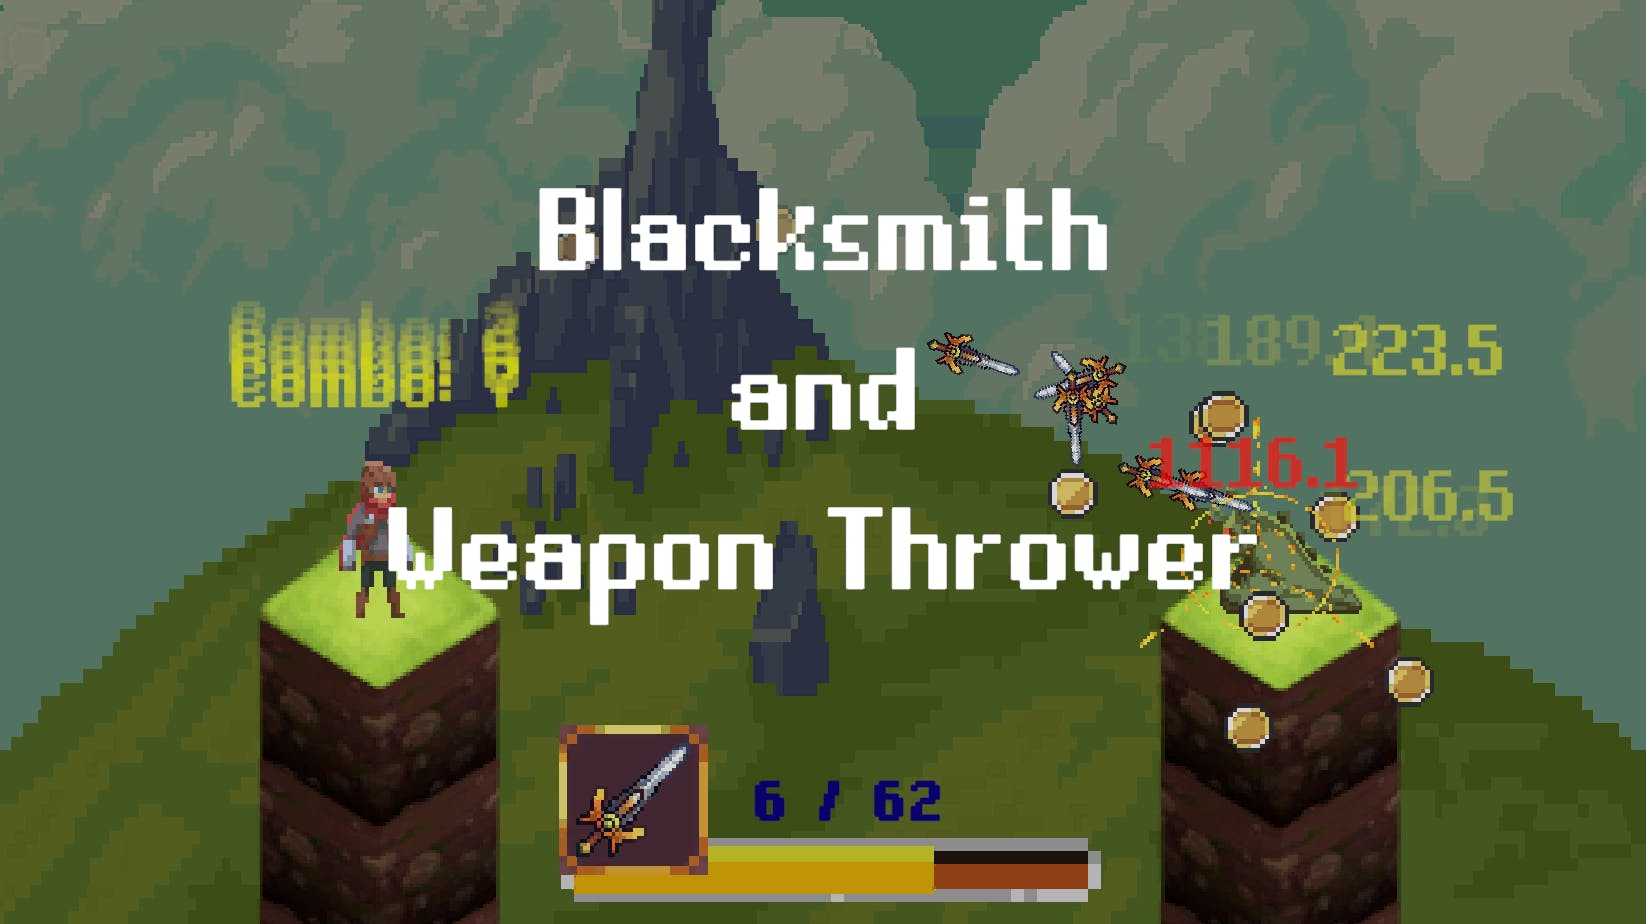 Blacksmith and Weapon Thrower